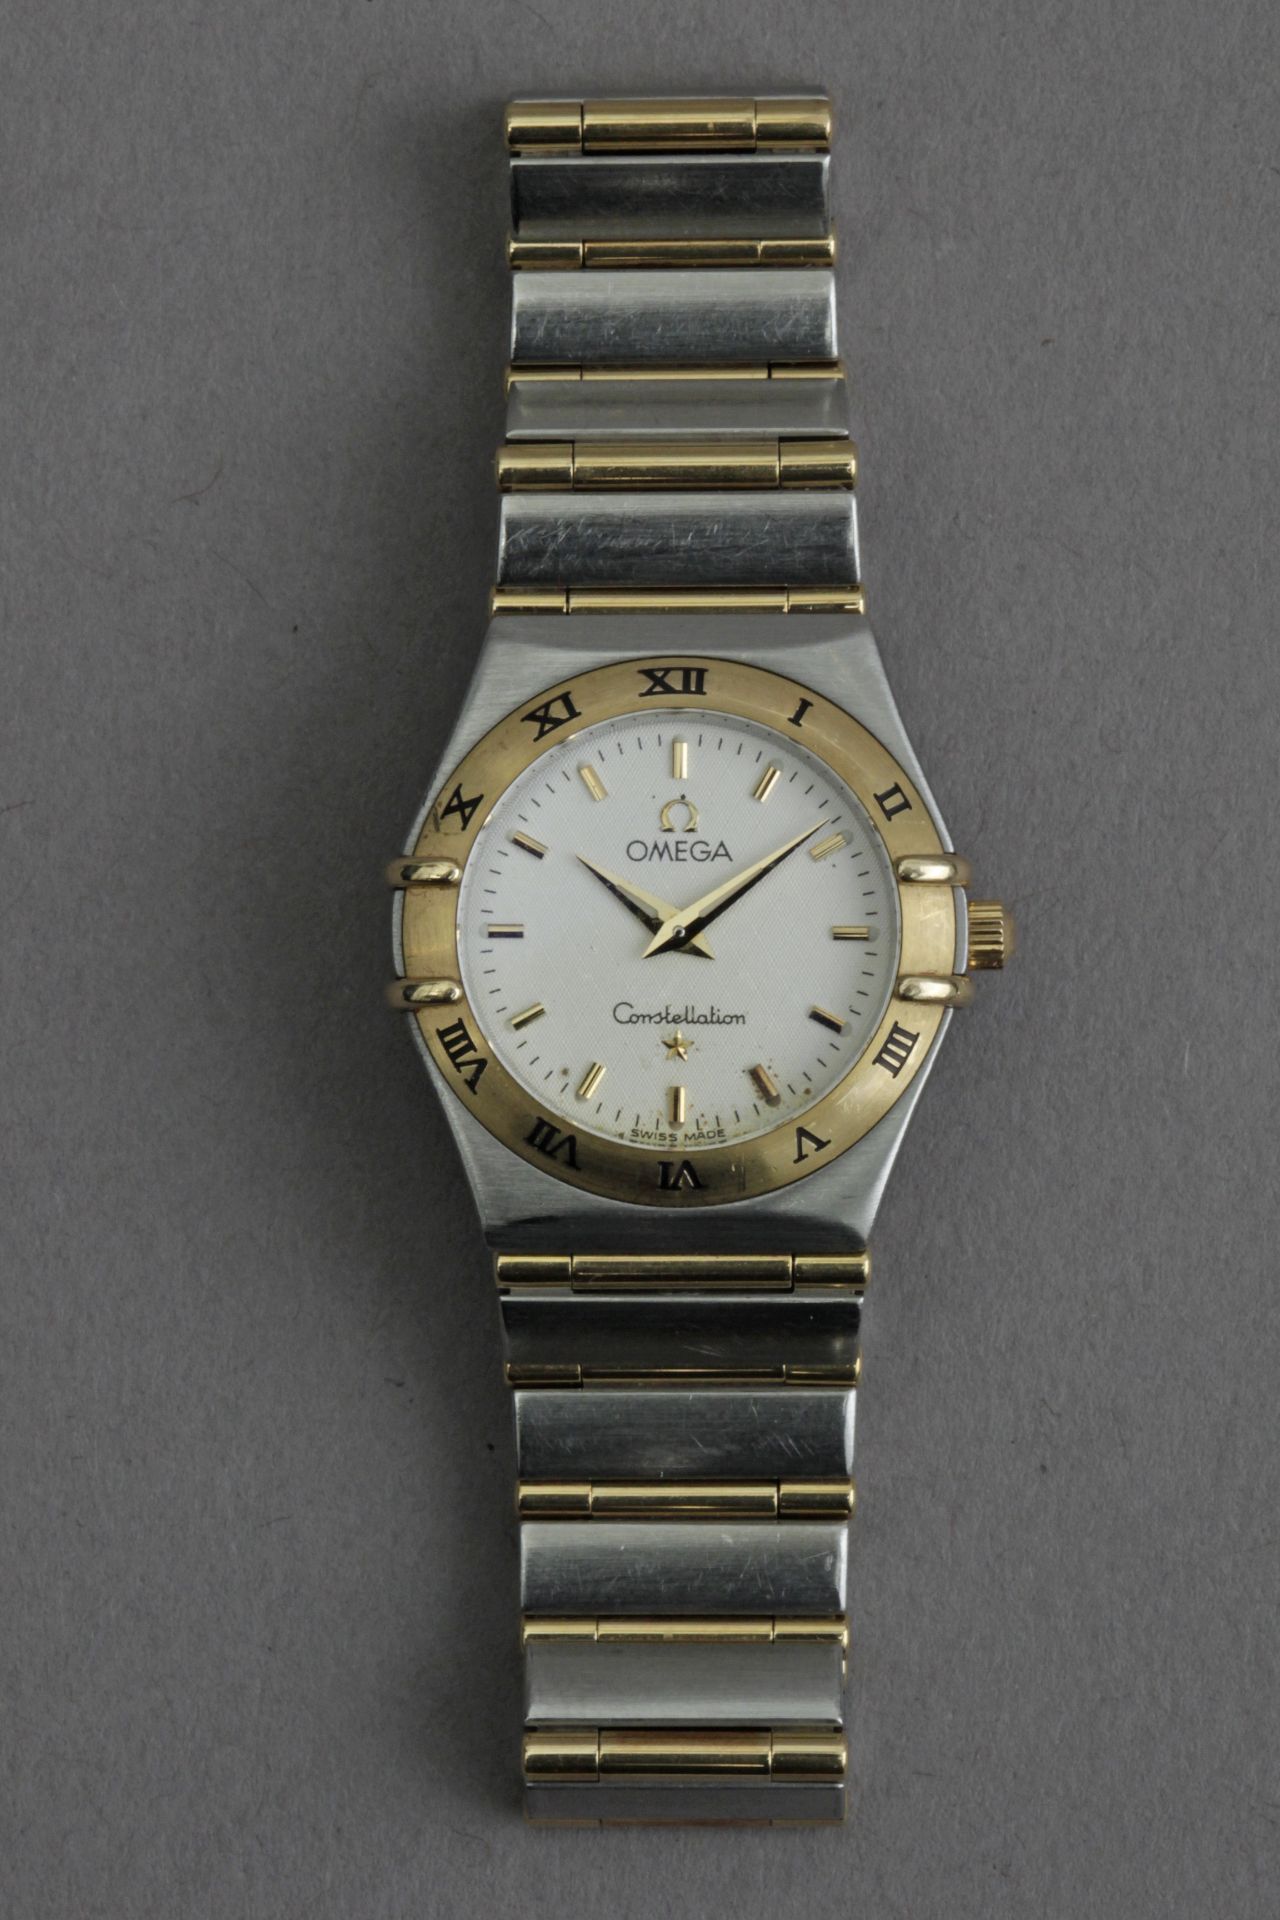 Omega. Constellation. Gold and steel ladies watch